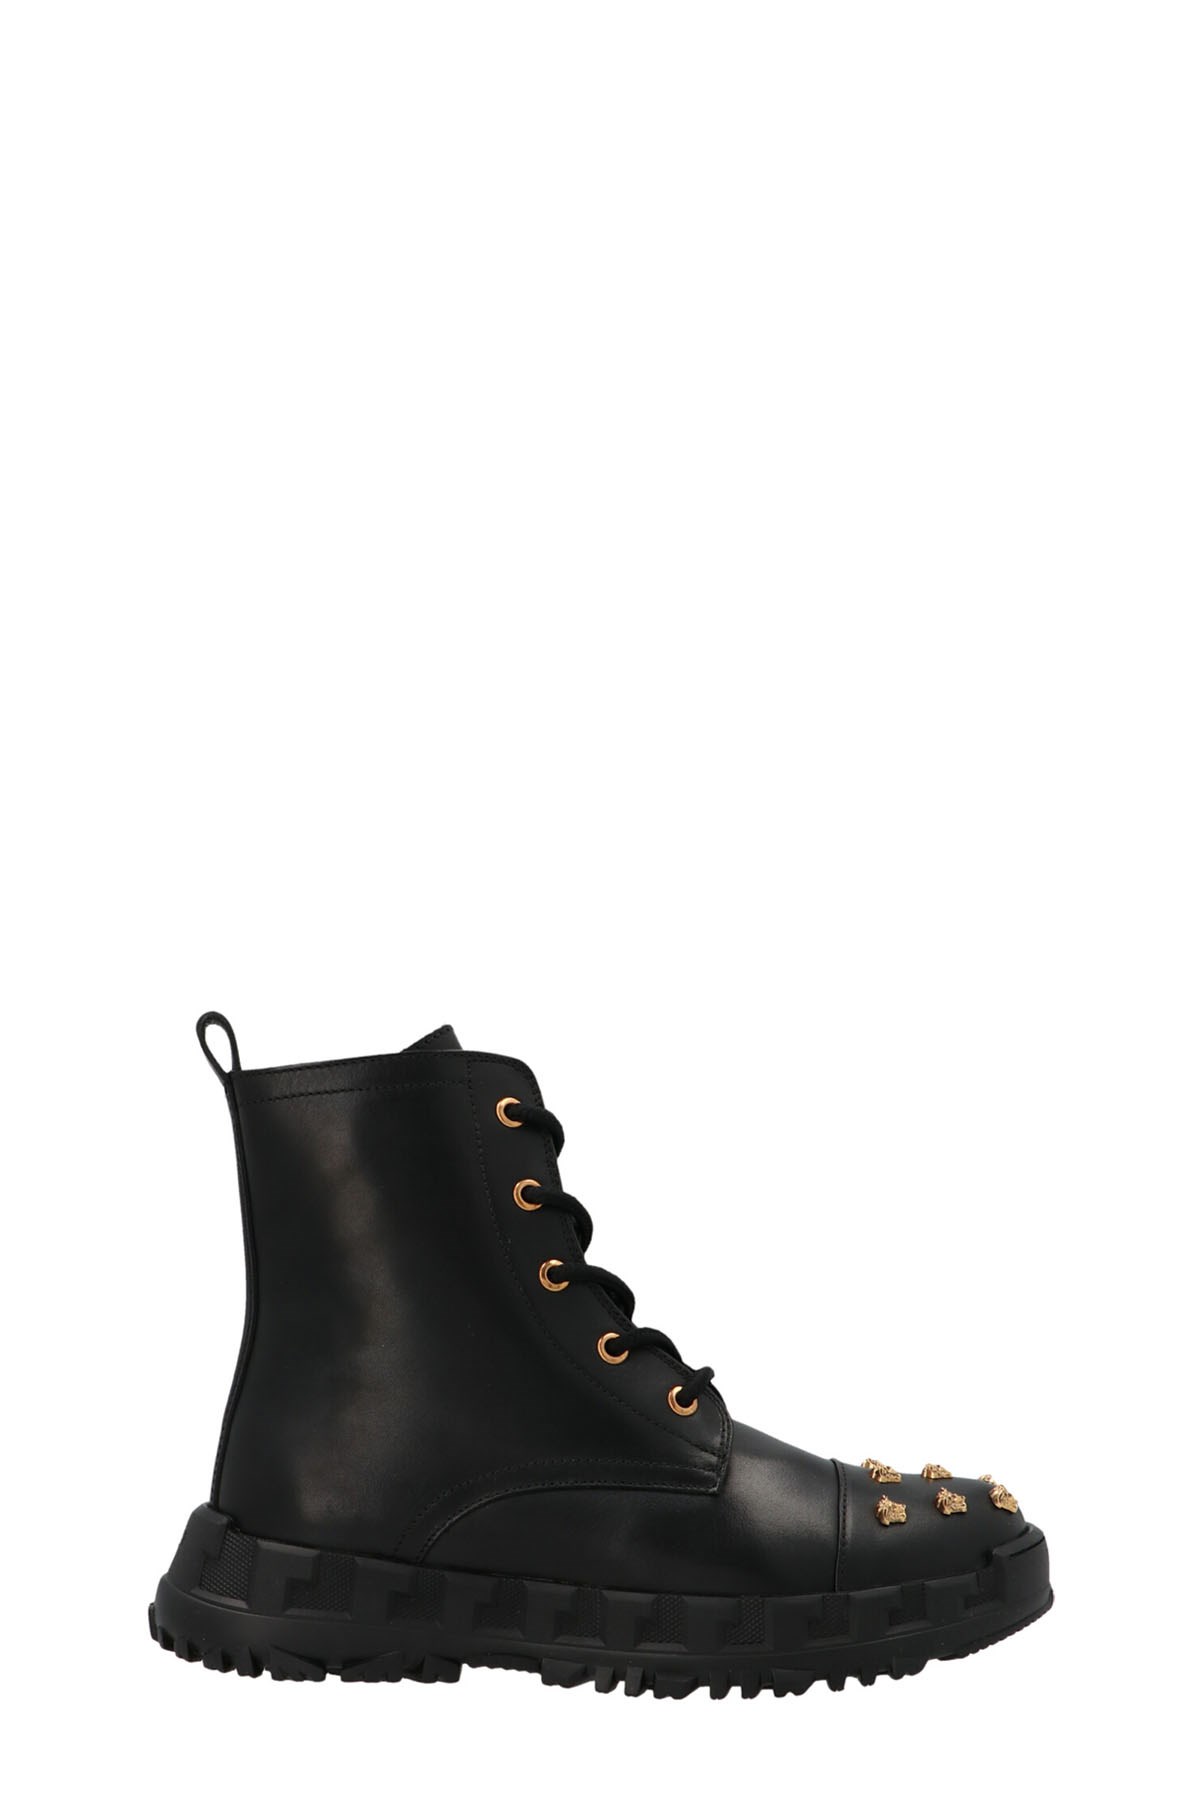 VERSACE KIDS Logo Leather Boots